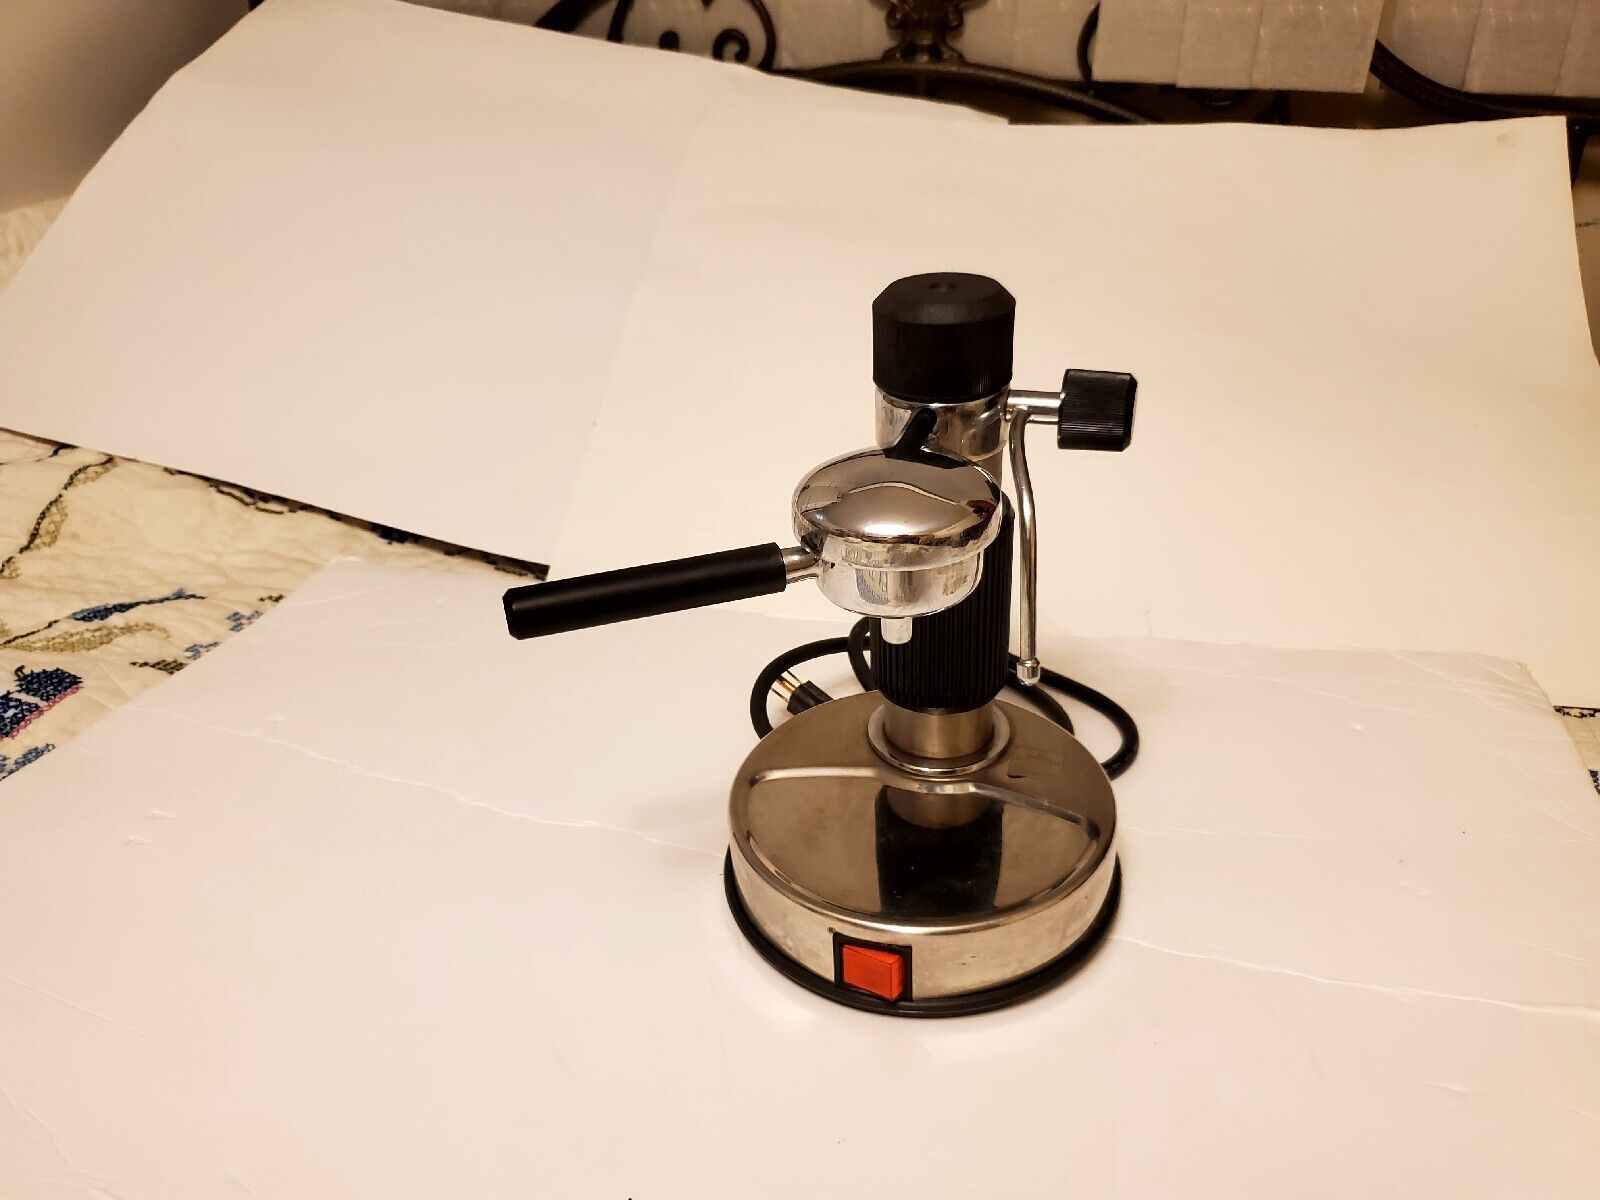 Primary image for Vintage Weil ECM-4 Espresso Coffee Maker 110 volt Machine Maker Stainless Tested